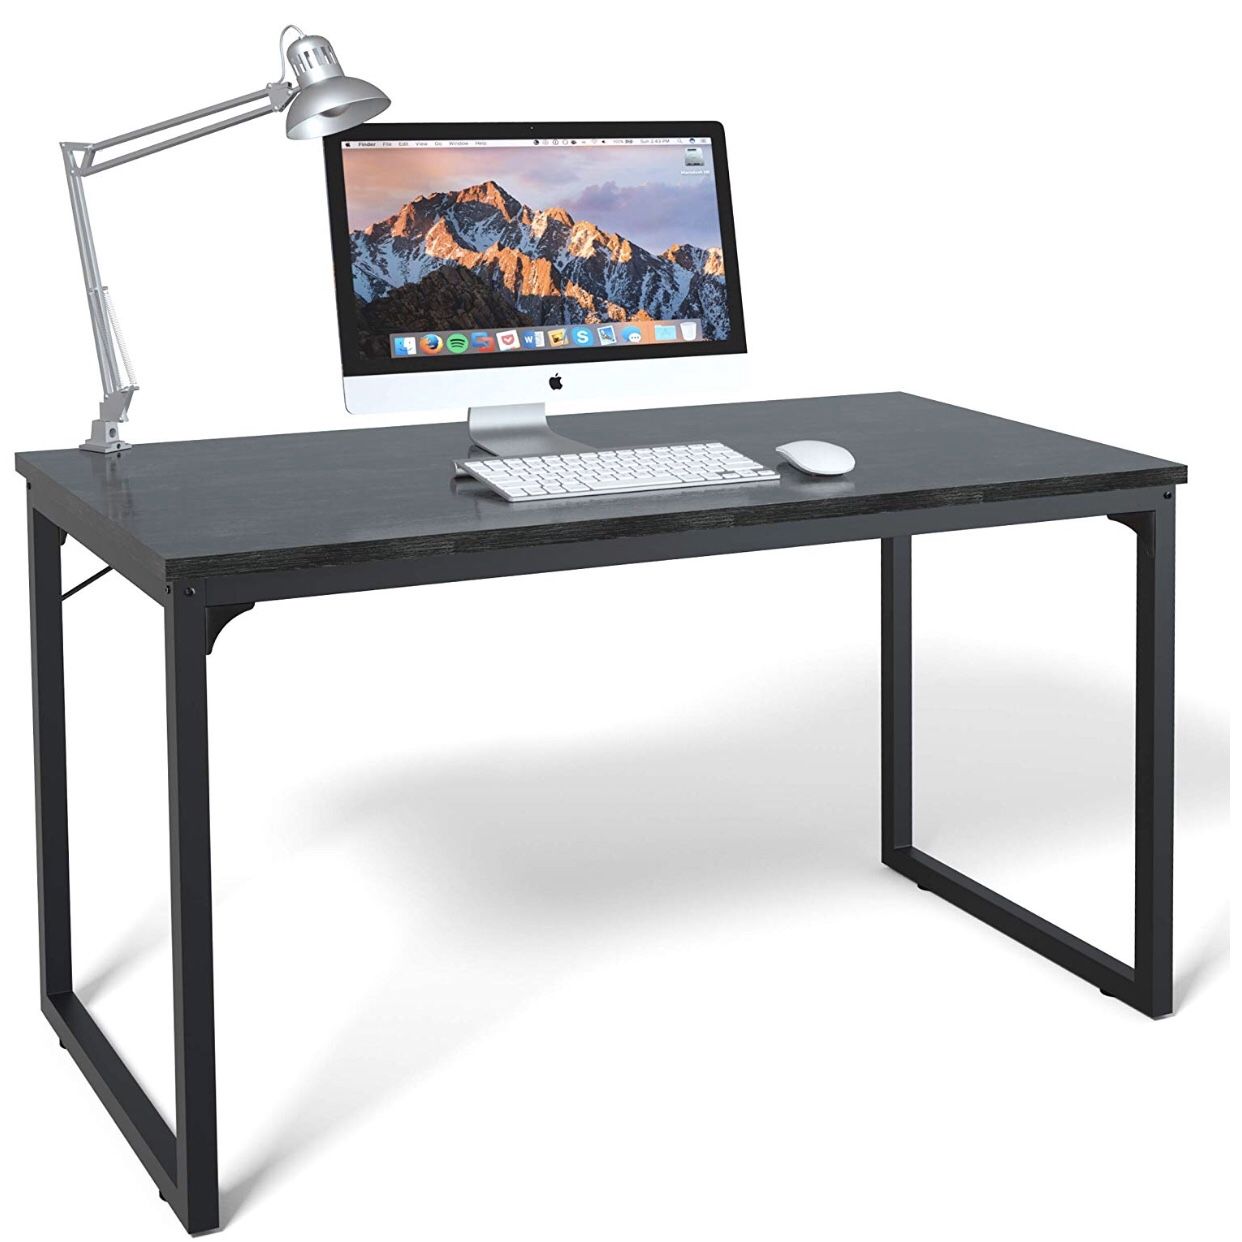 NEW Computer Desk 47", Modern Simple Style Desk for Home Office, Gaming, Sturdy Writing Desk, Coleshome, Black